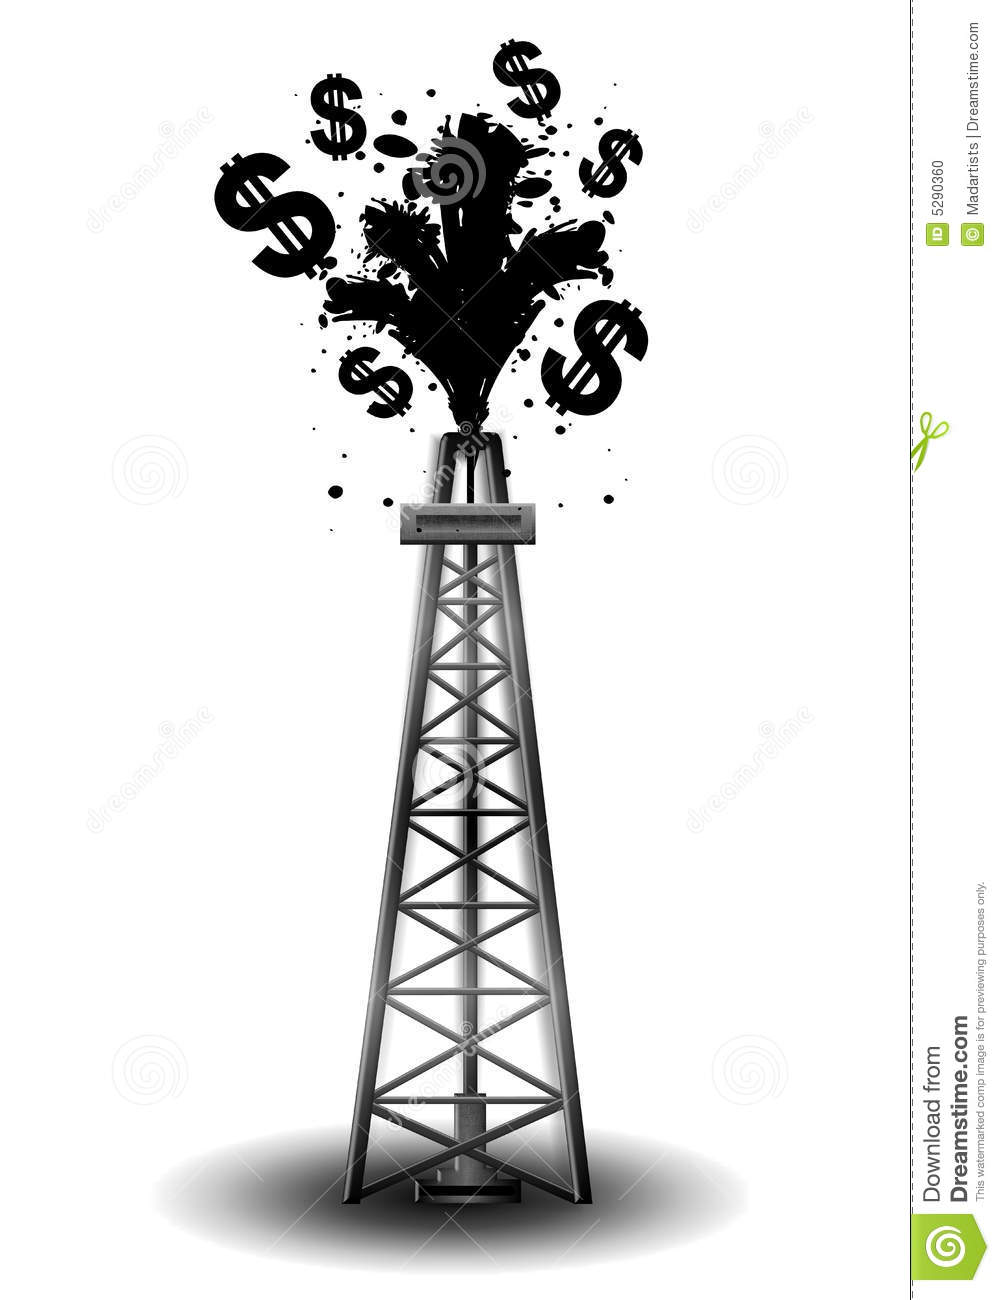 An Illustration Featuring An Oil Drilling Rig With Black Crude And